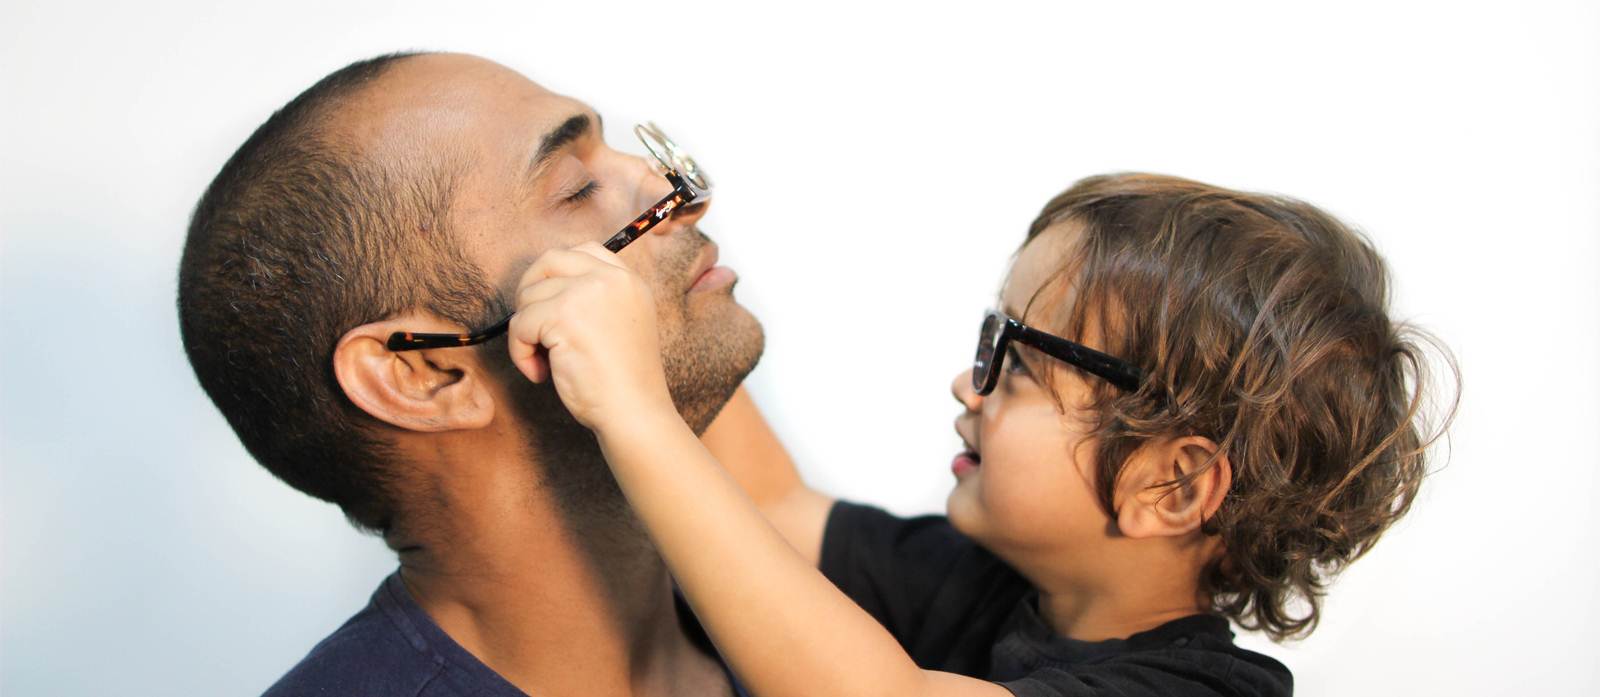 Signs Your Child May Need Glasses | Trends 